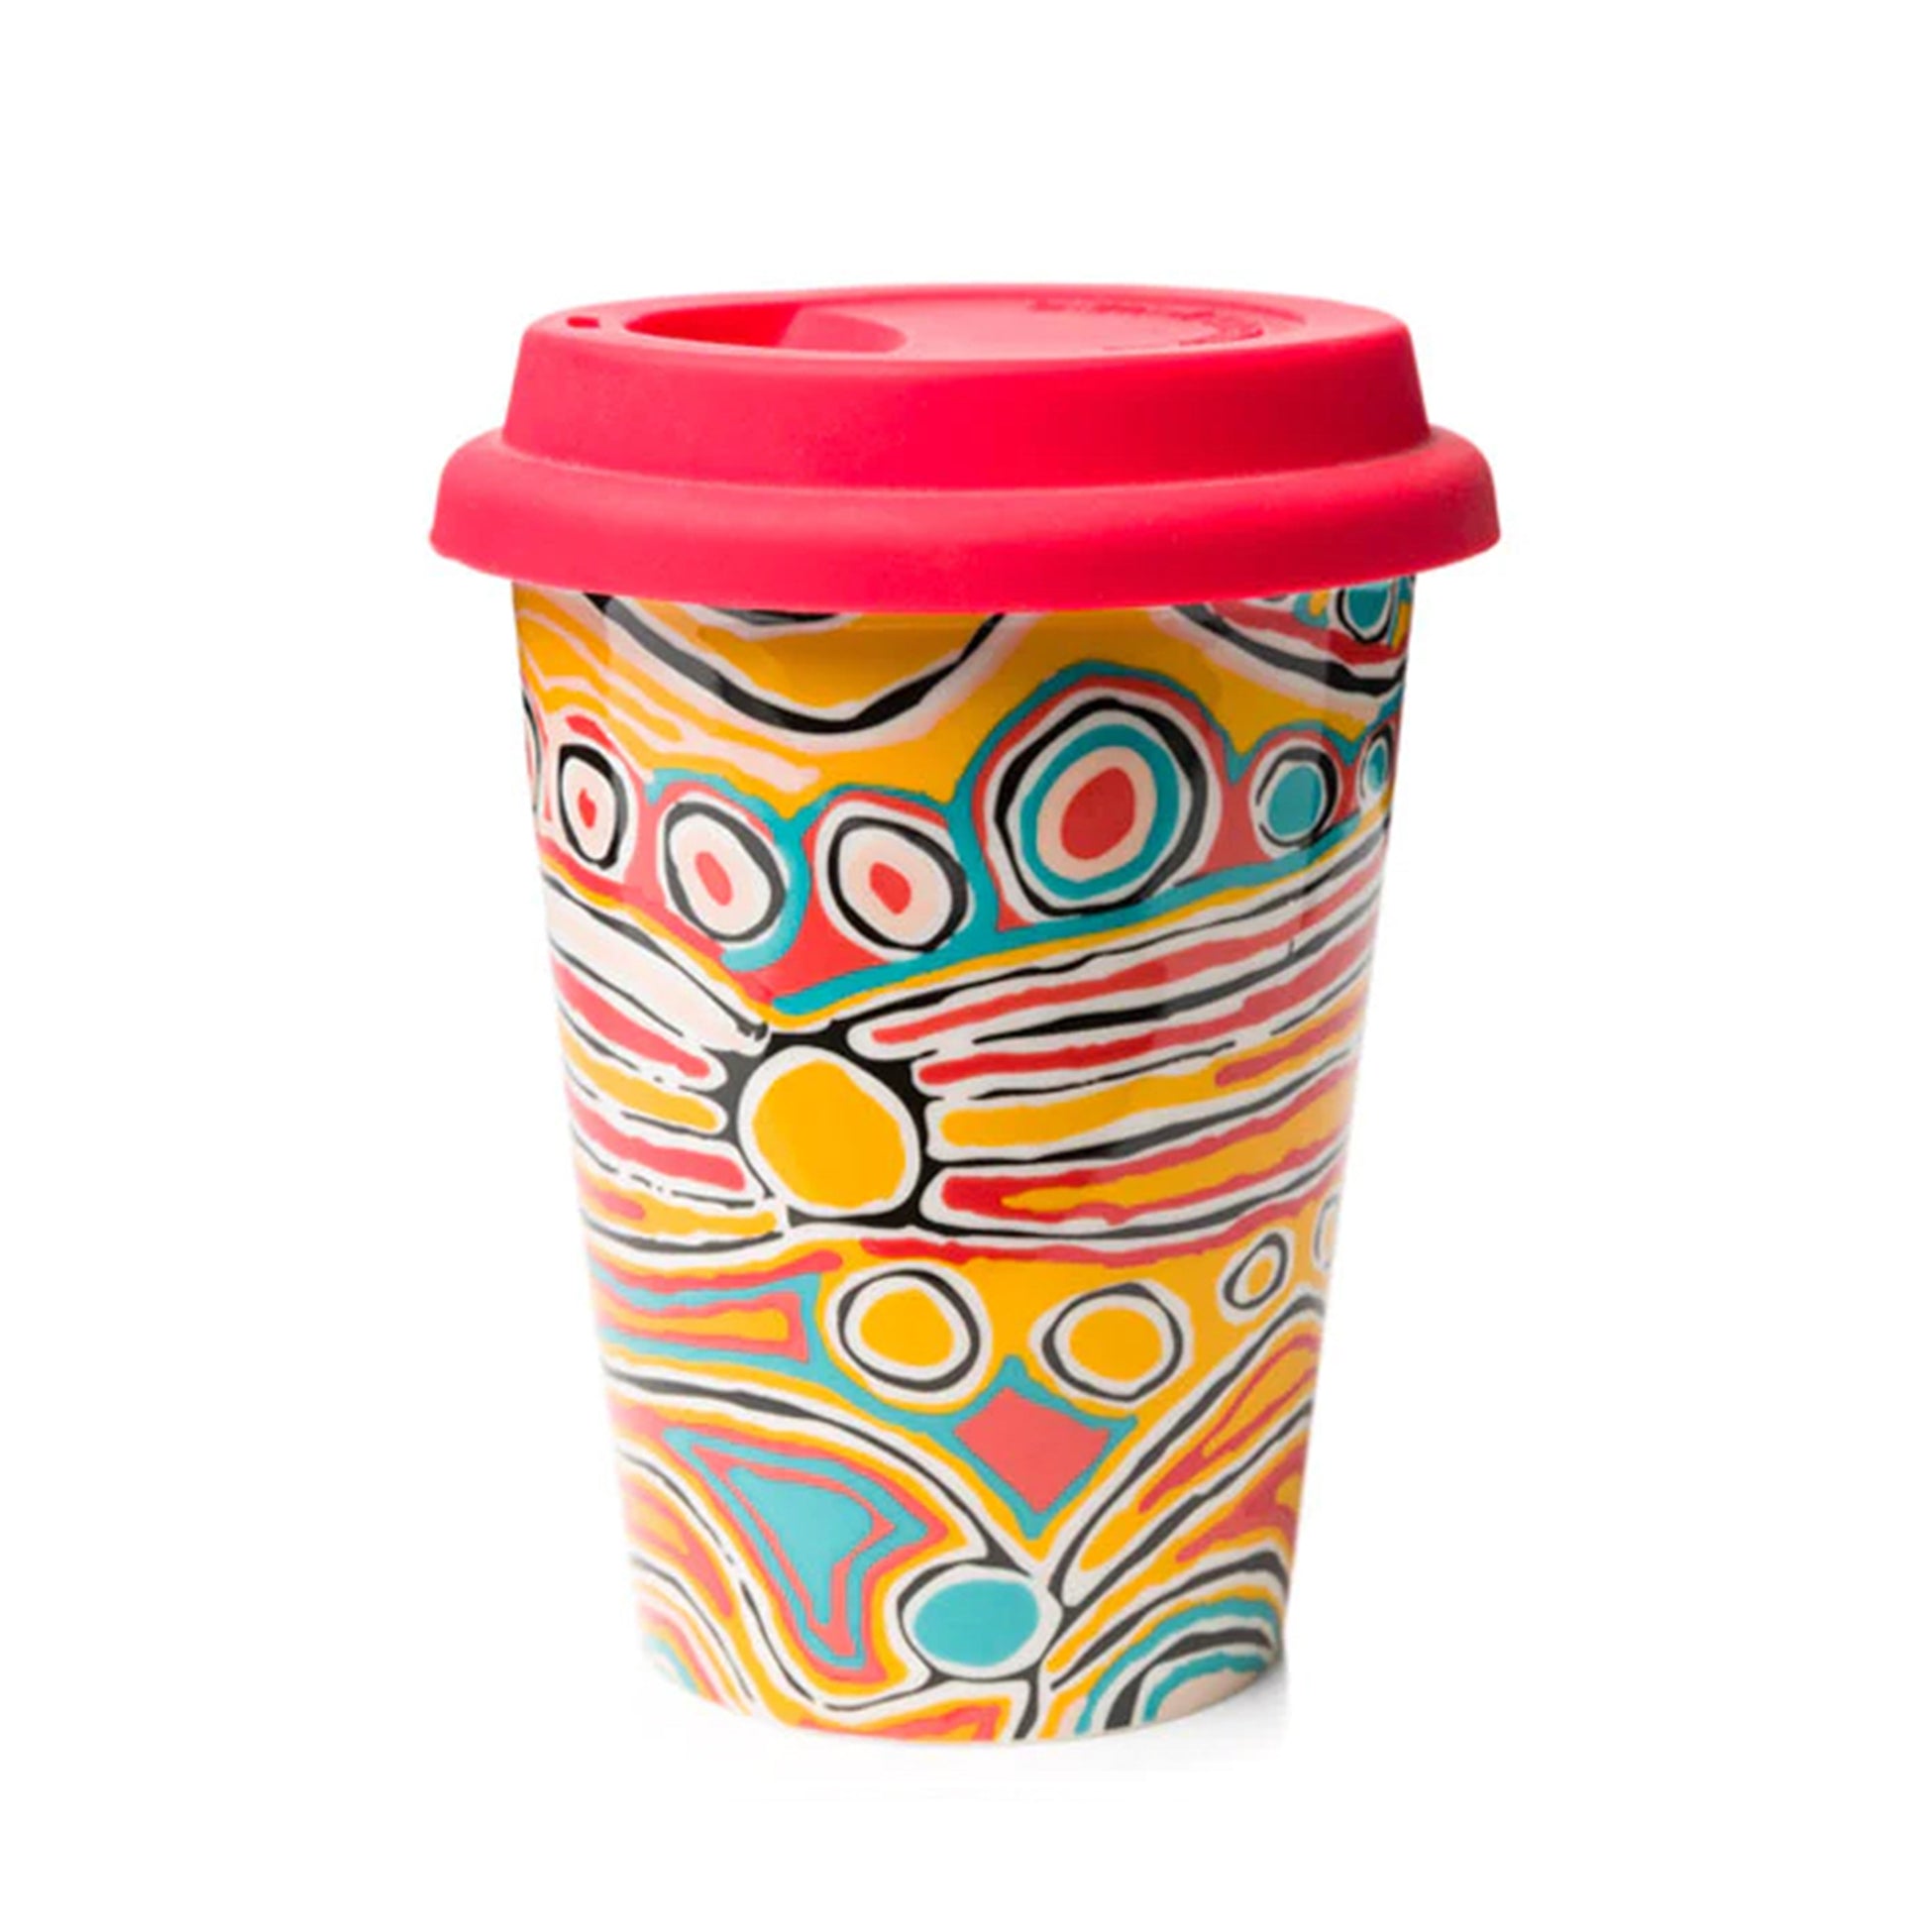 pretty keep cup in indigenous design